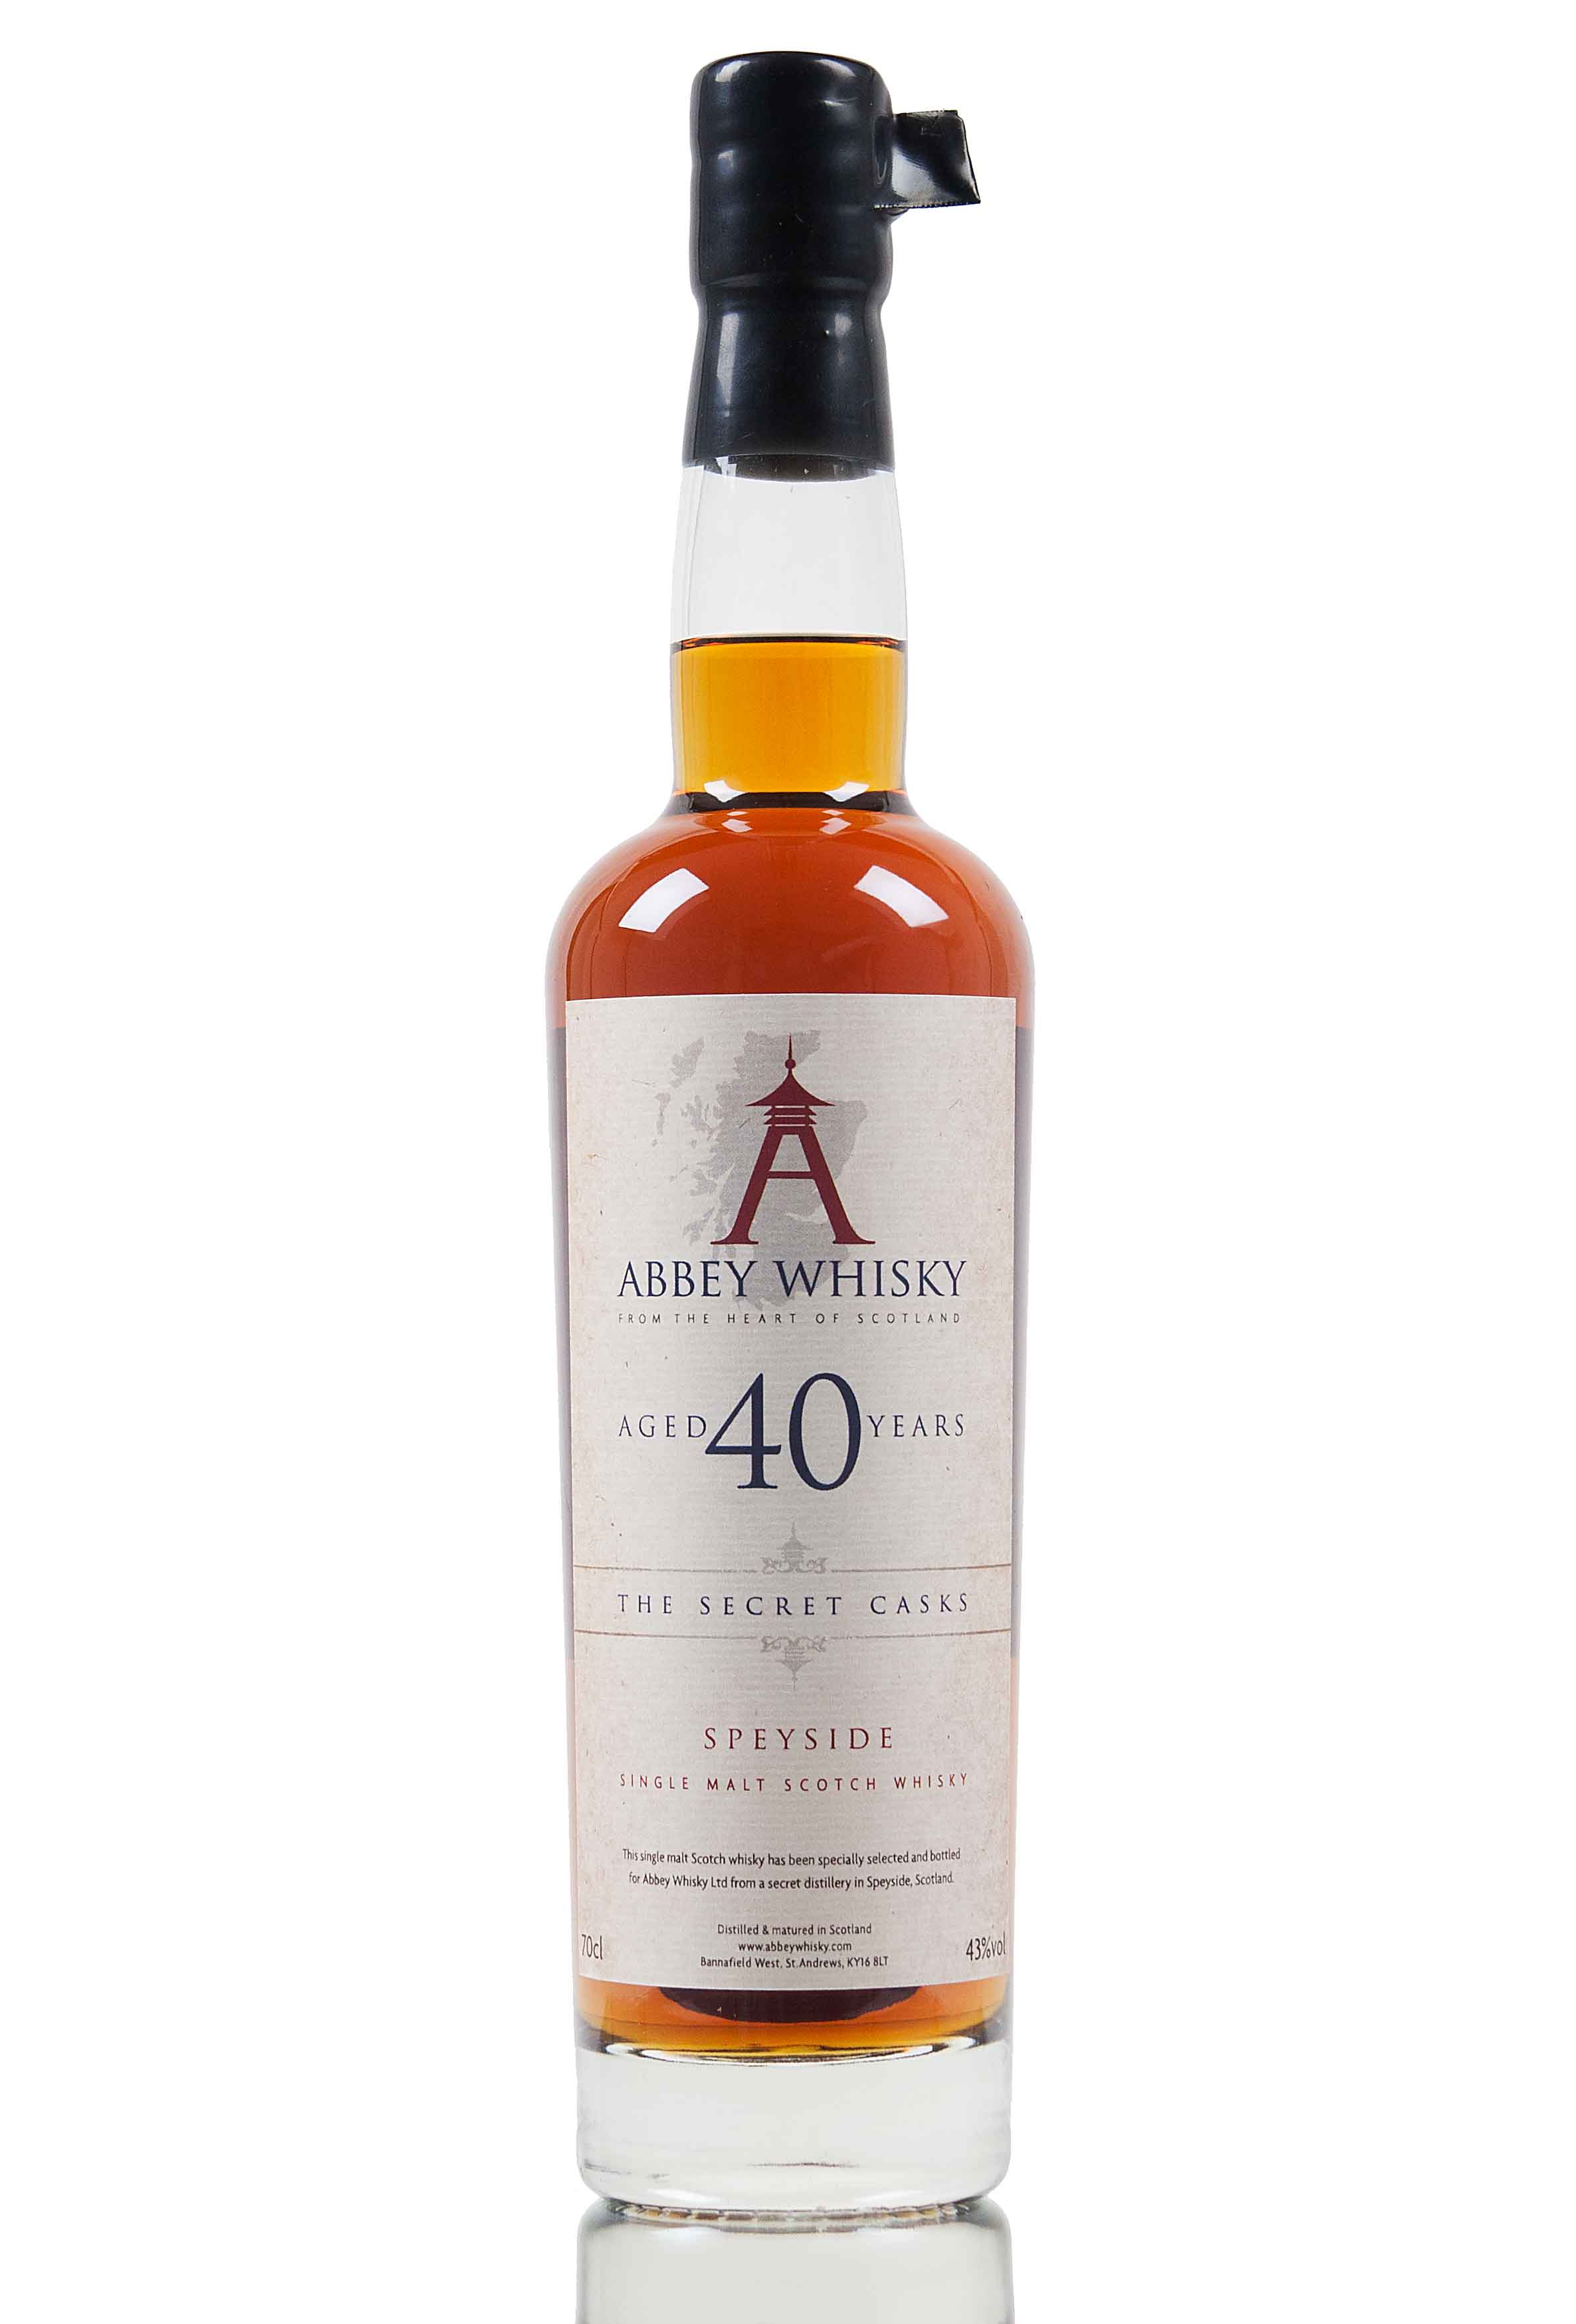 Abbey Whisky 40 Year Old Speyside | The Secret Casks